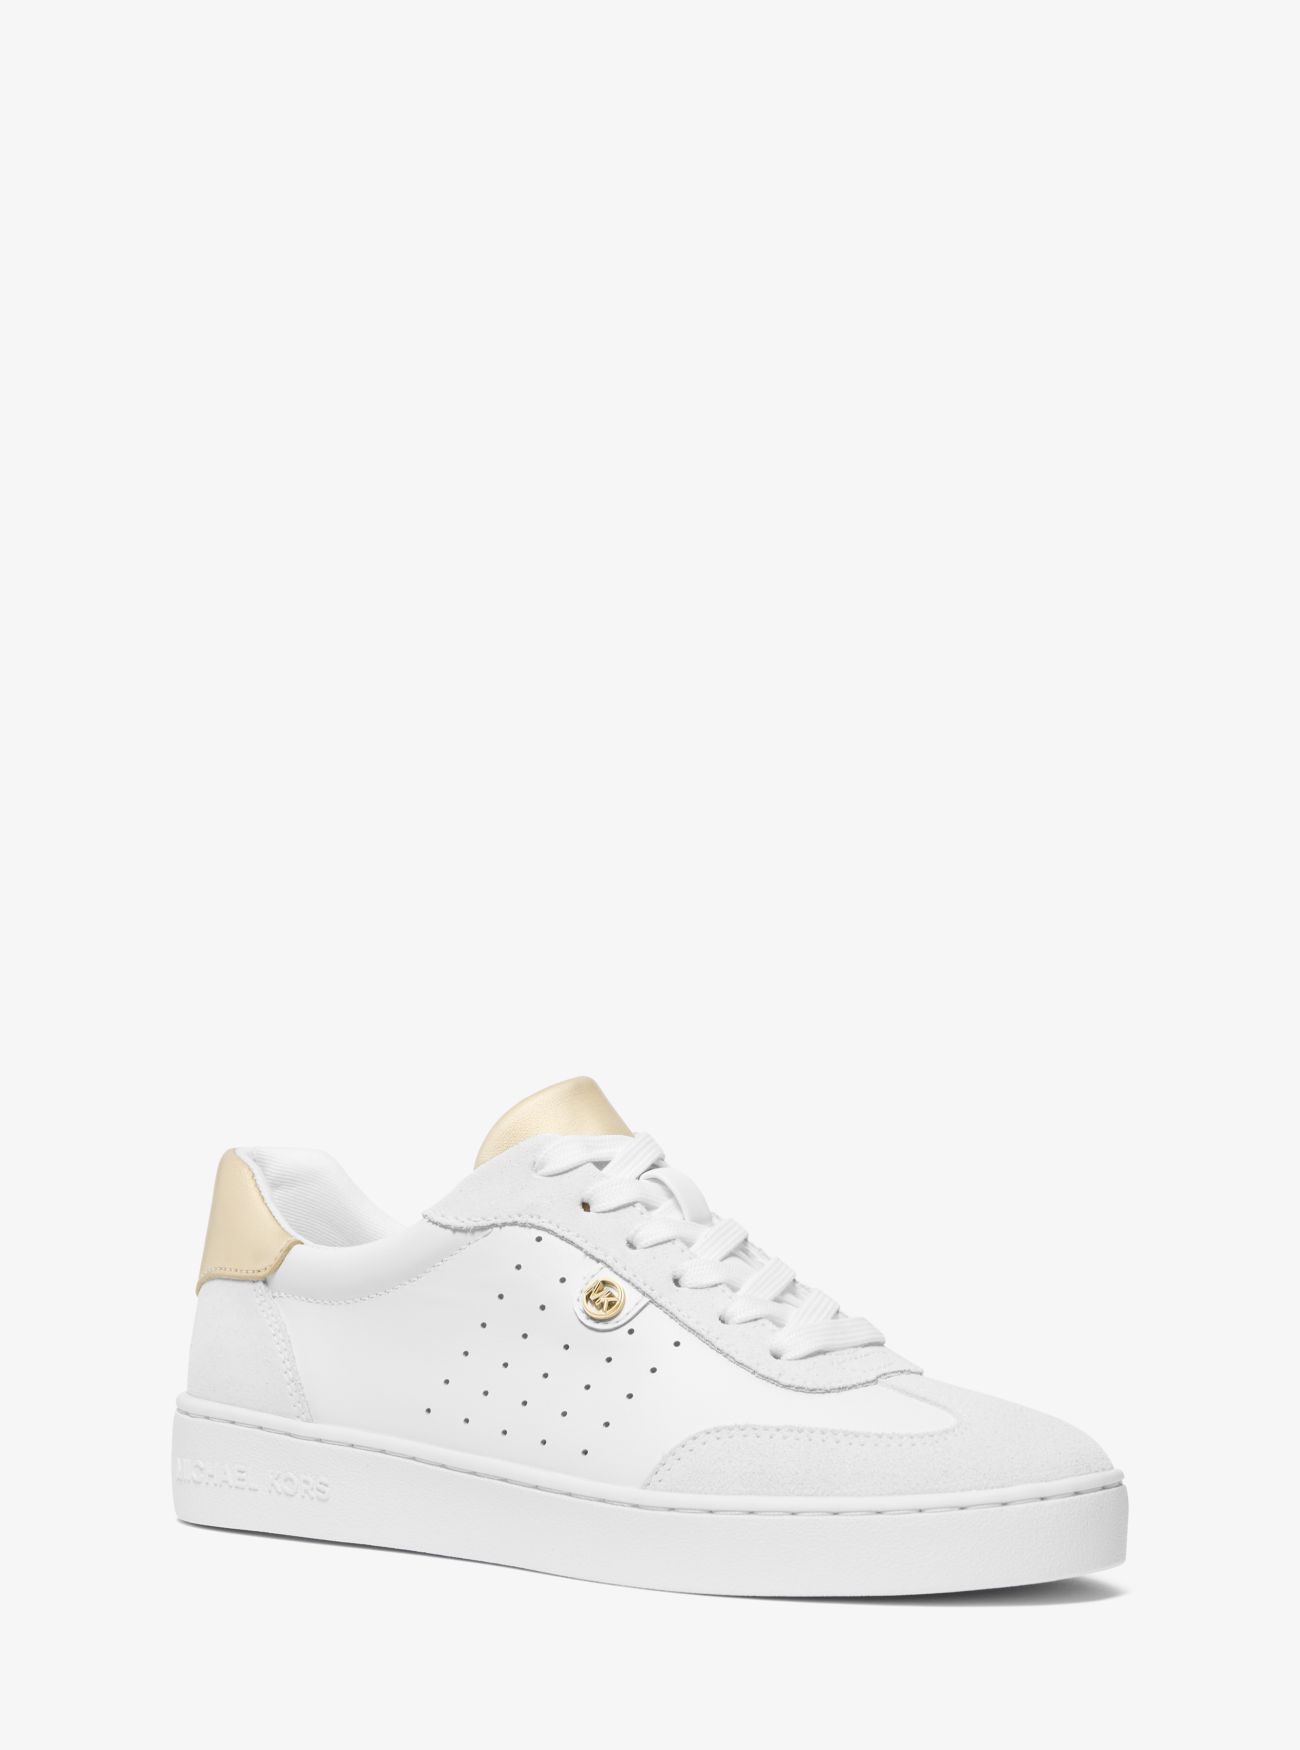 MK Scotty Leather Trainers - Gold - Michael Kors